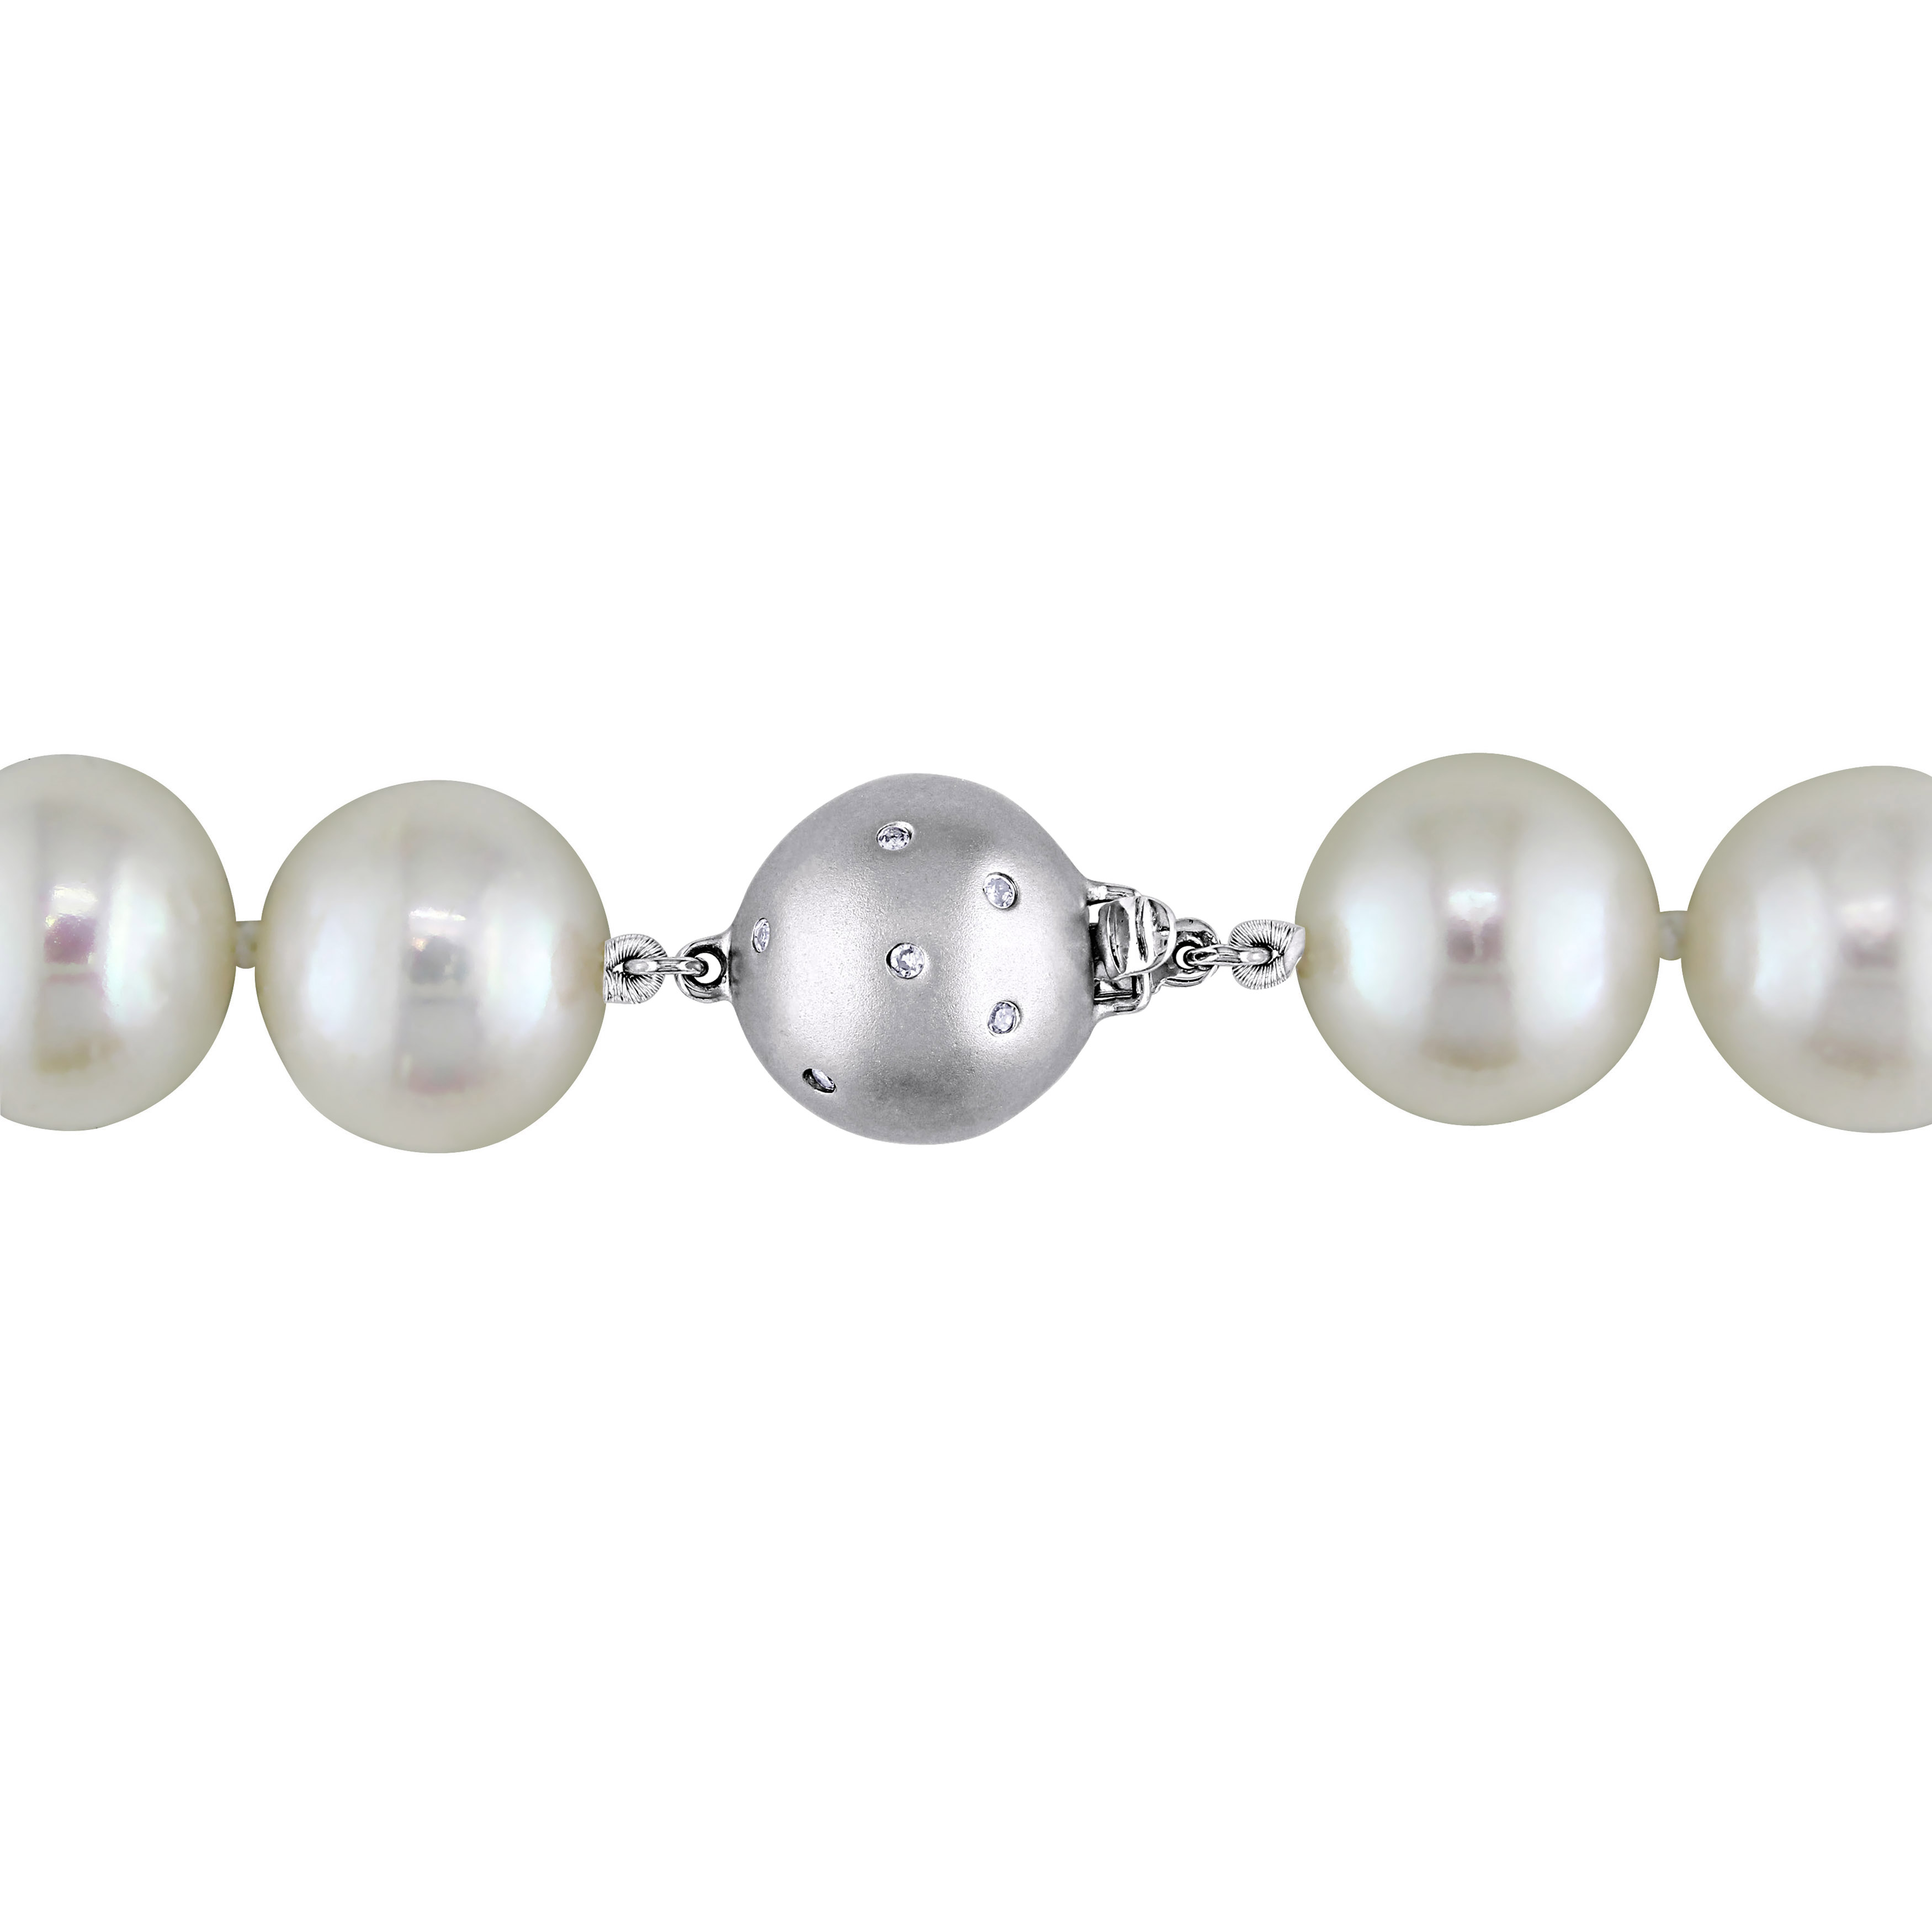 12.5-14.5 MM Semi-Round Cultured Freshwater Pearl Strand Necklace with 14k White Gold Diamond Accent Clasp - 18 in